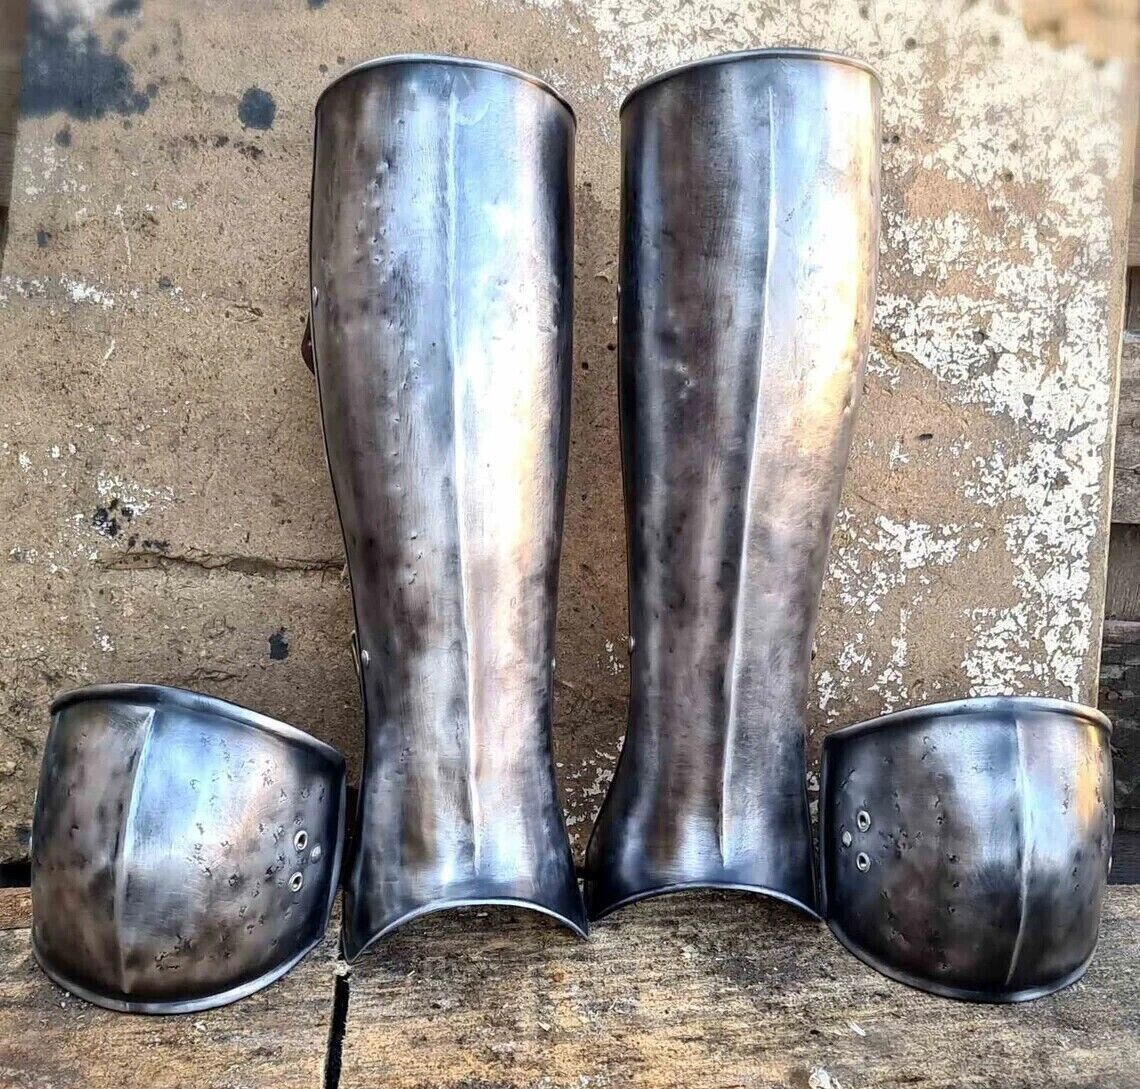 Knees and legs greaves Ciri Armor, pair of legs protection Zireael Witcher